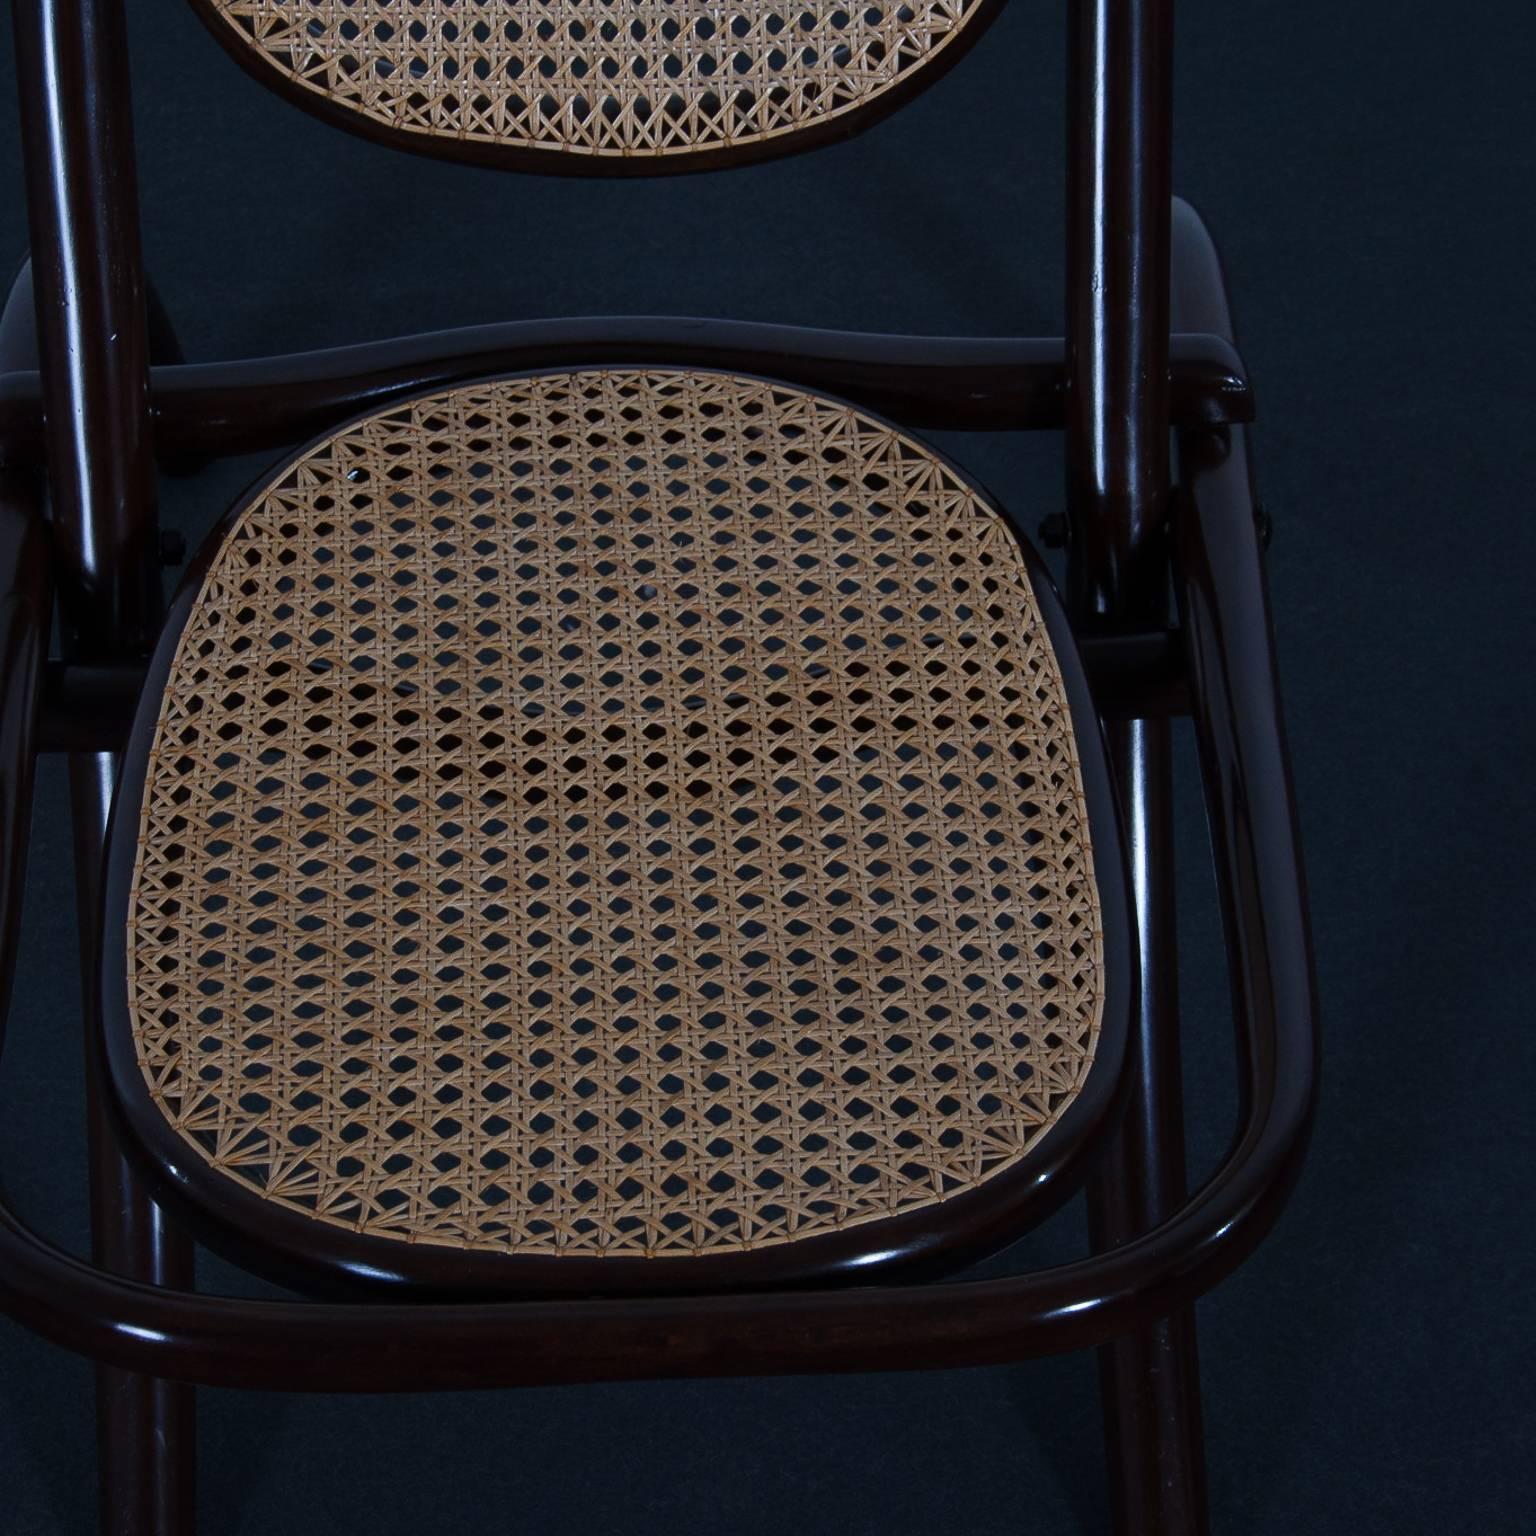 Foldable original Thonet low chair in perfect condition - wickerwork new, functions overhauled and new surface newly polished.
Designed in 1863.
Produced between 1880 and 1910.
A perfect piece of decoration as well as a very functional standby